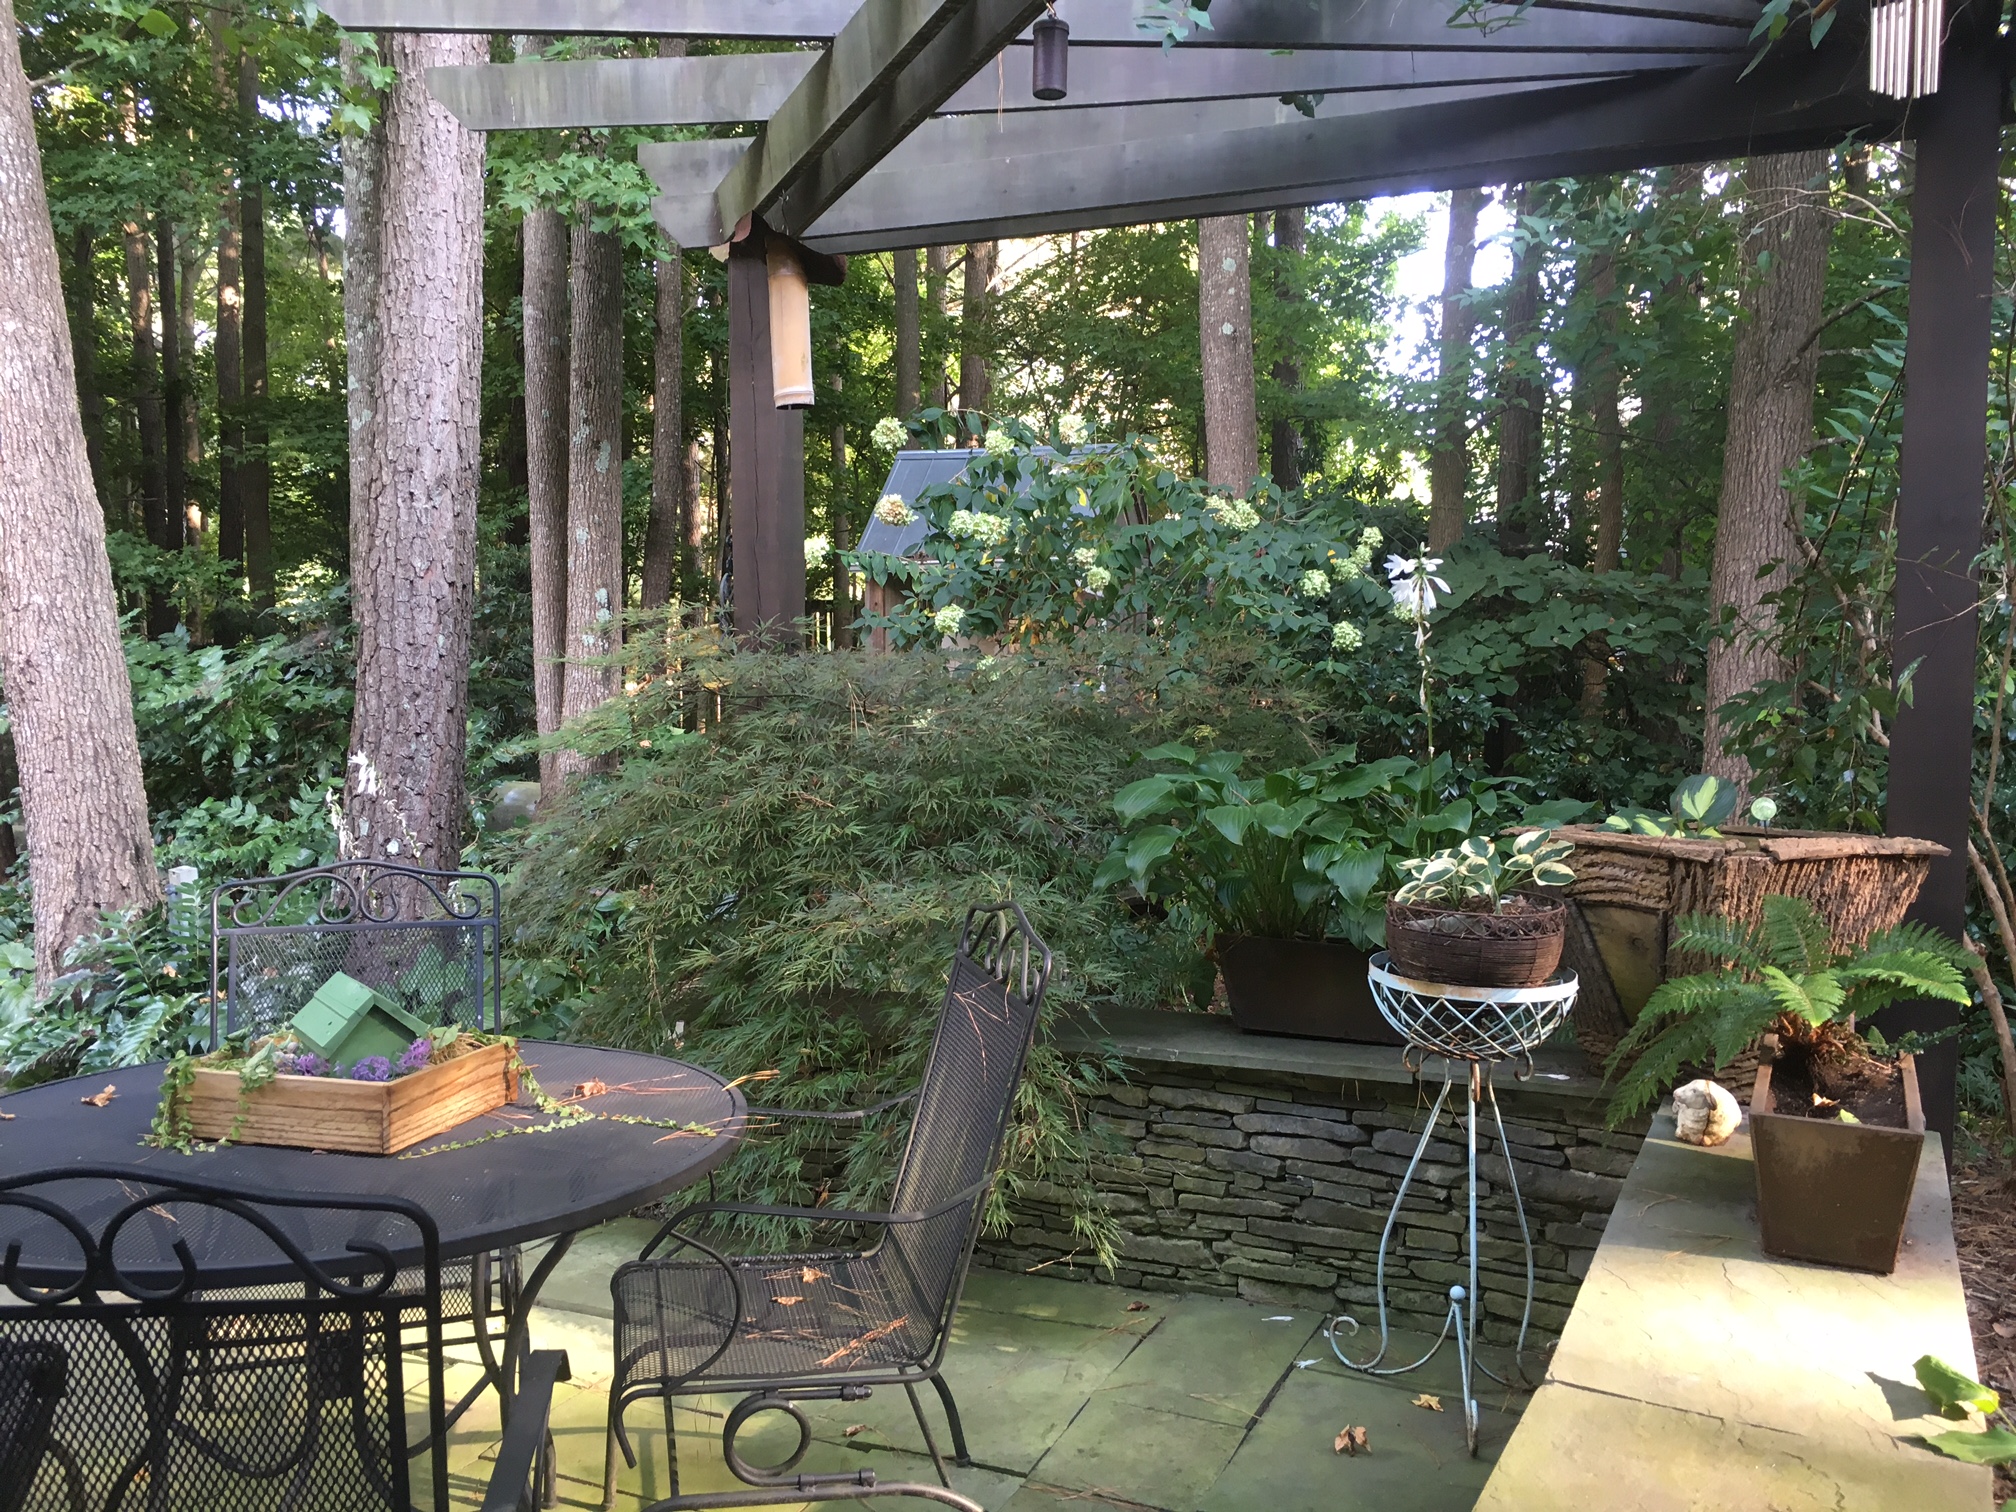 Shannon Hathaway's garden offers sanctuary for its guests among the plants of the dining patio.